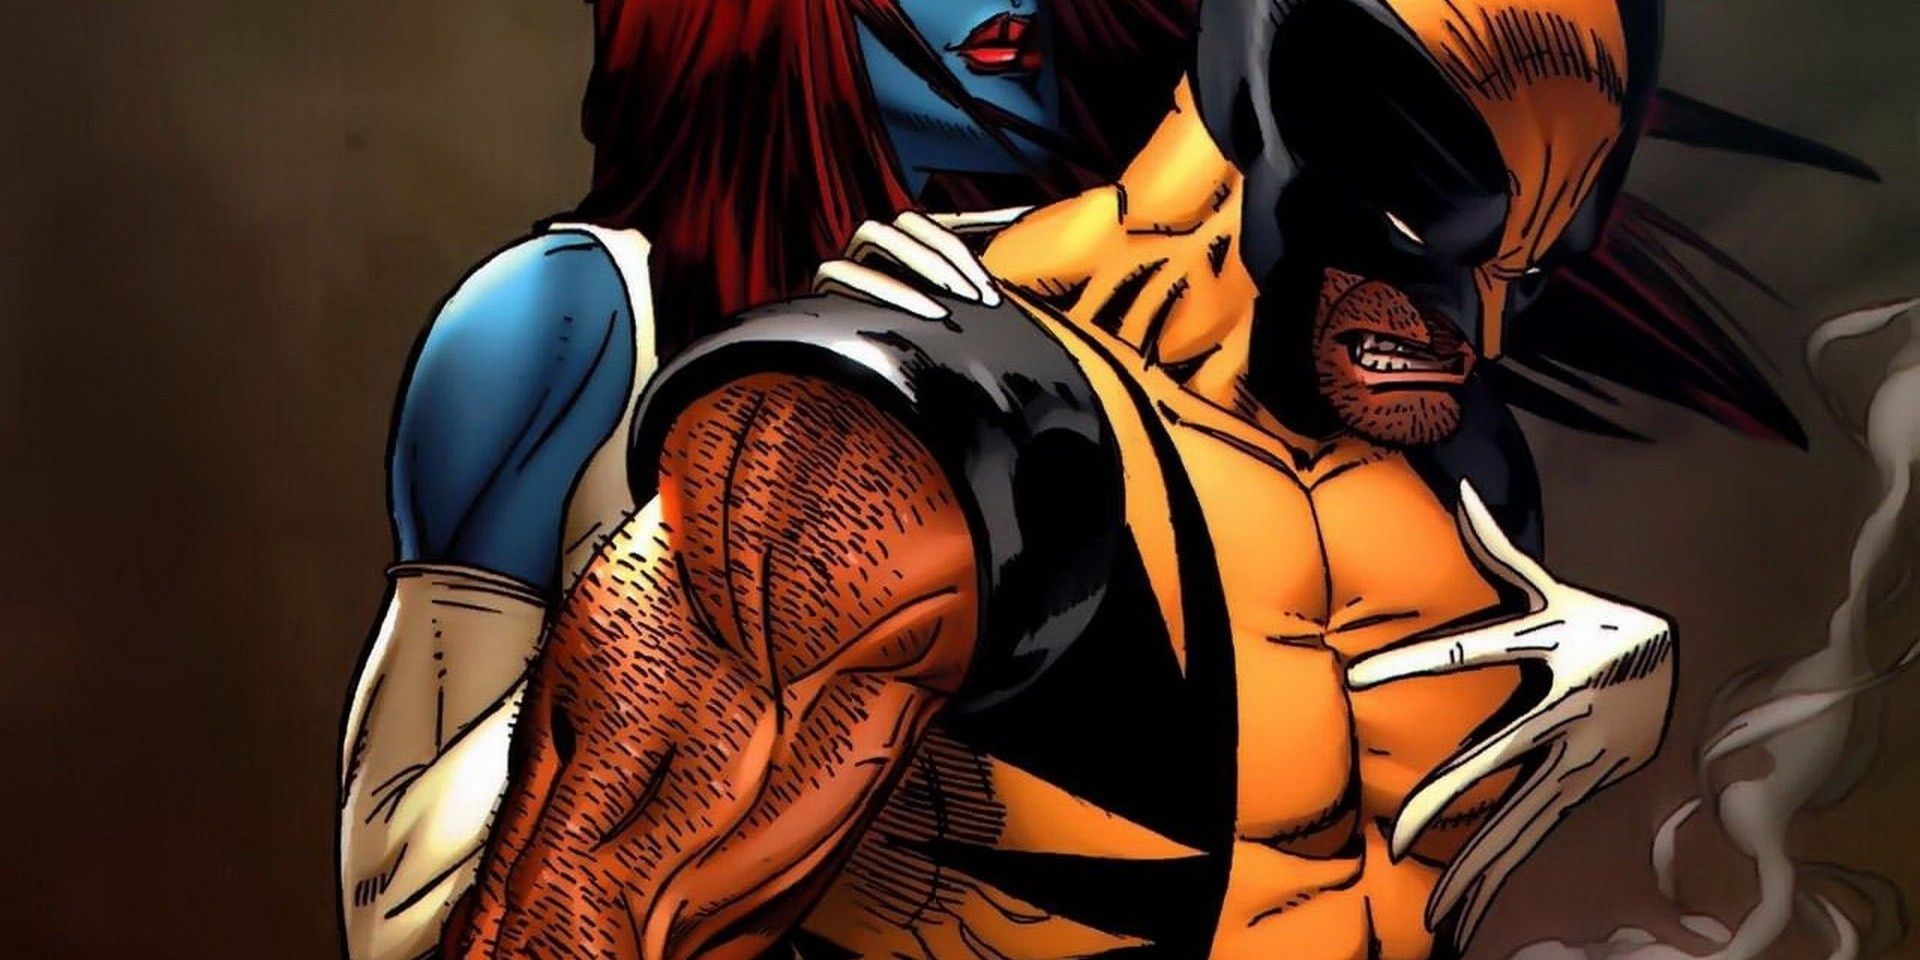 Mystique standing behind Wolverine with her arms wrapped around him